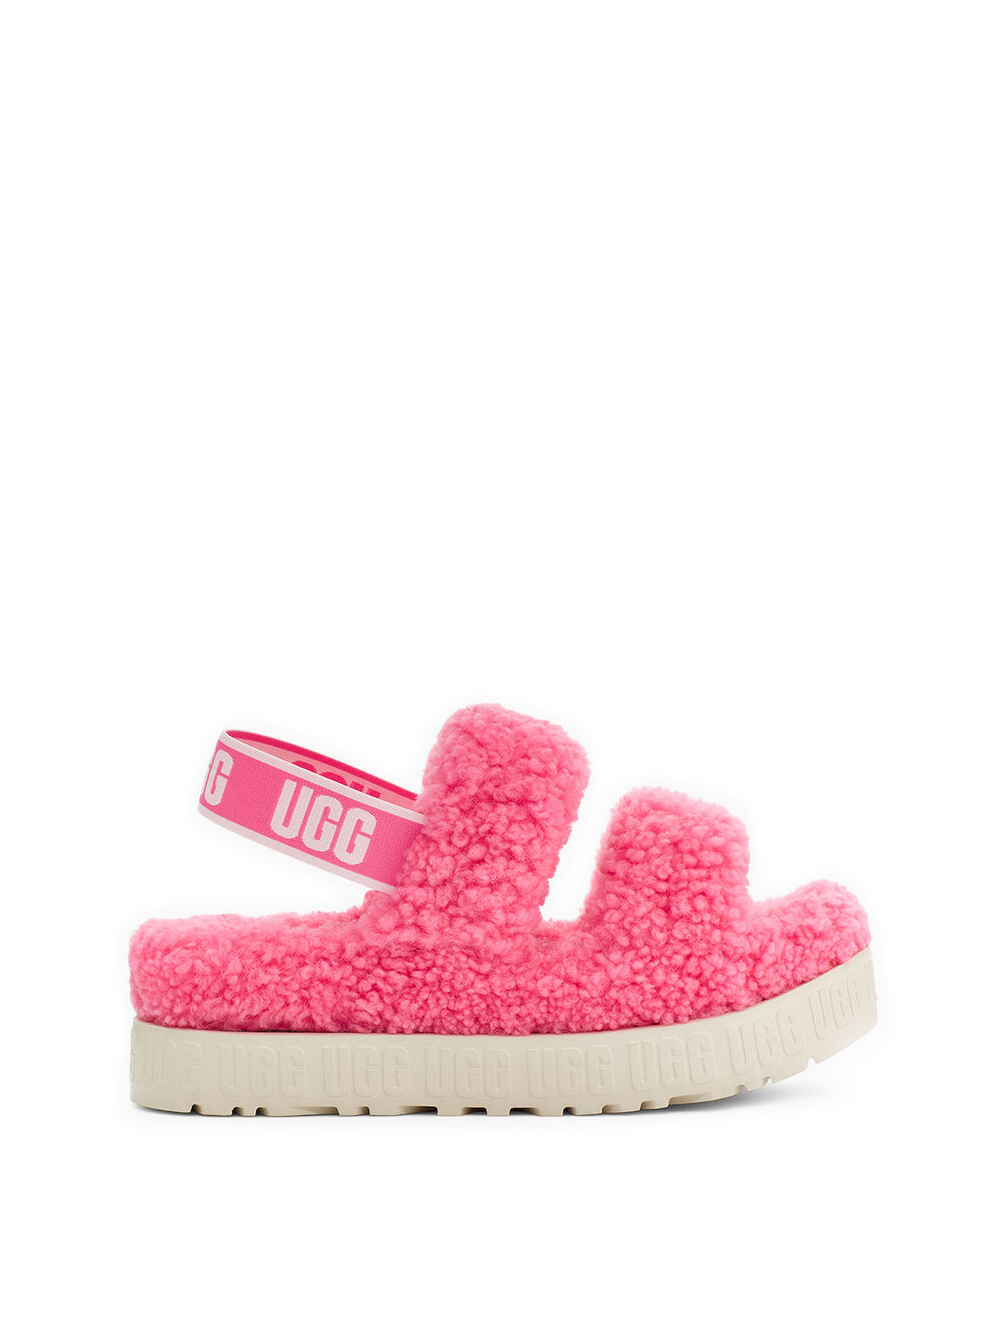 Oh Fluffita Slide in Pink